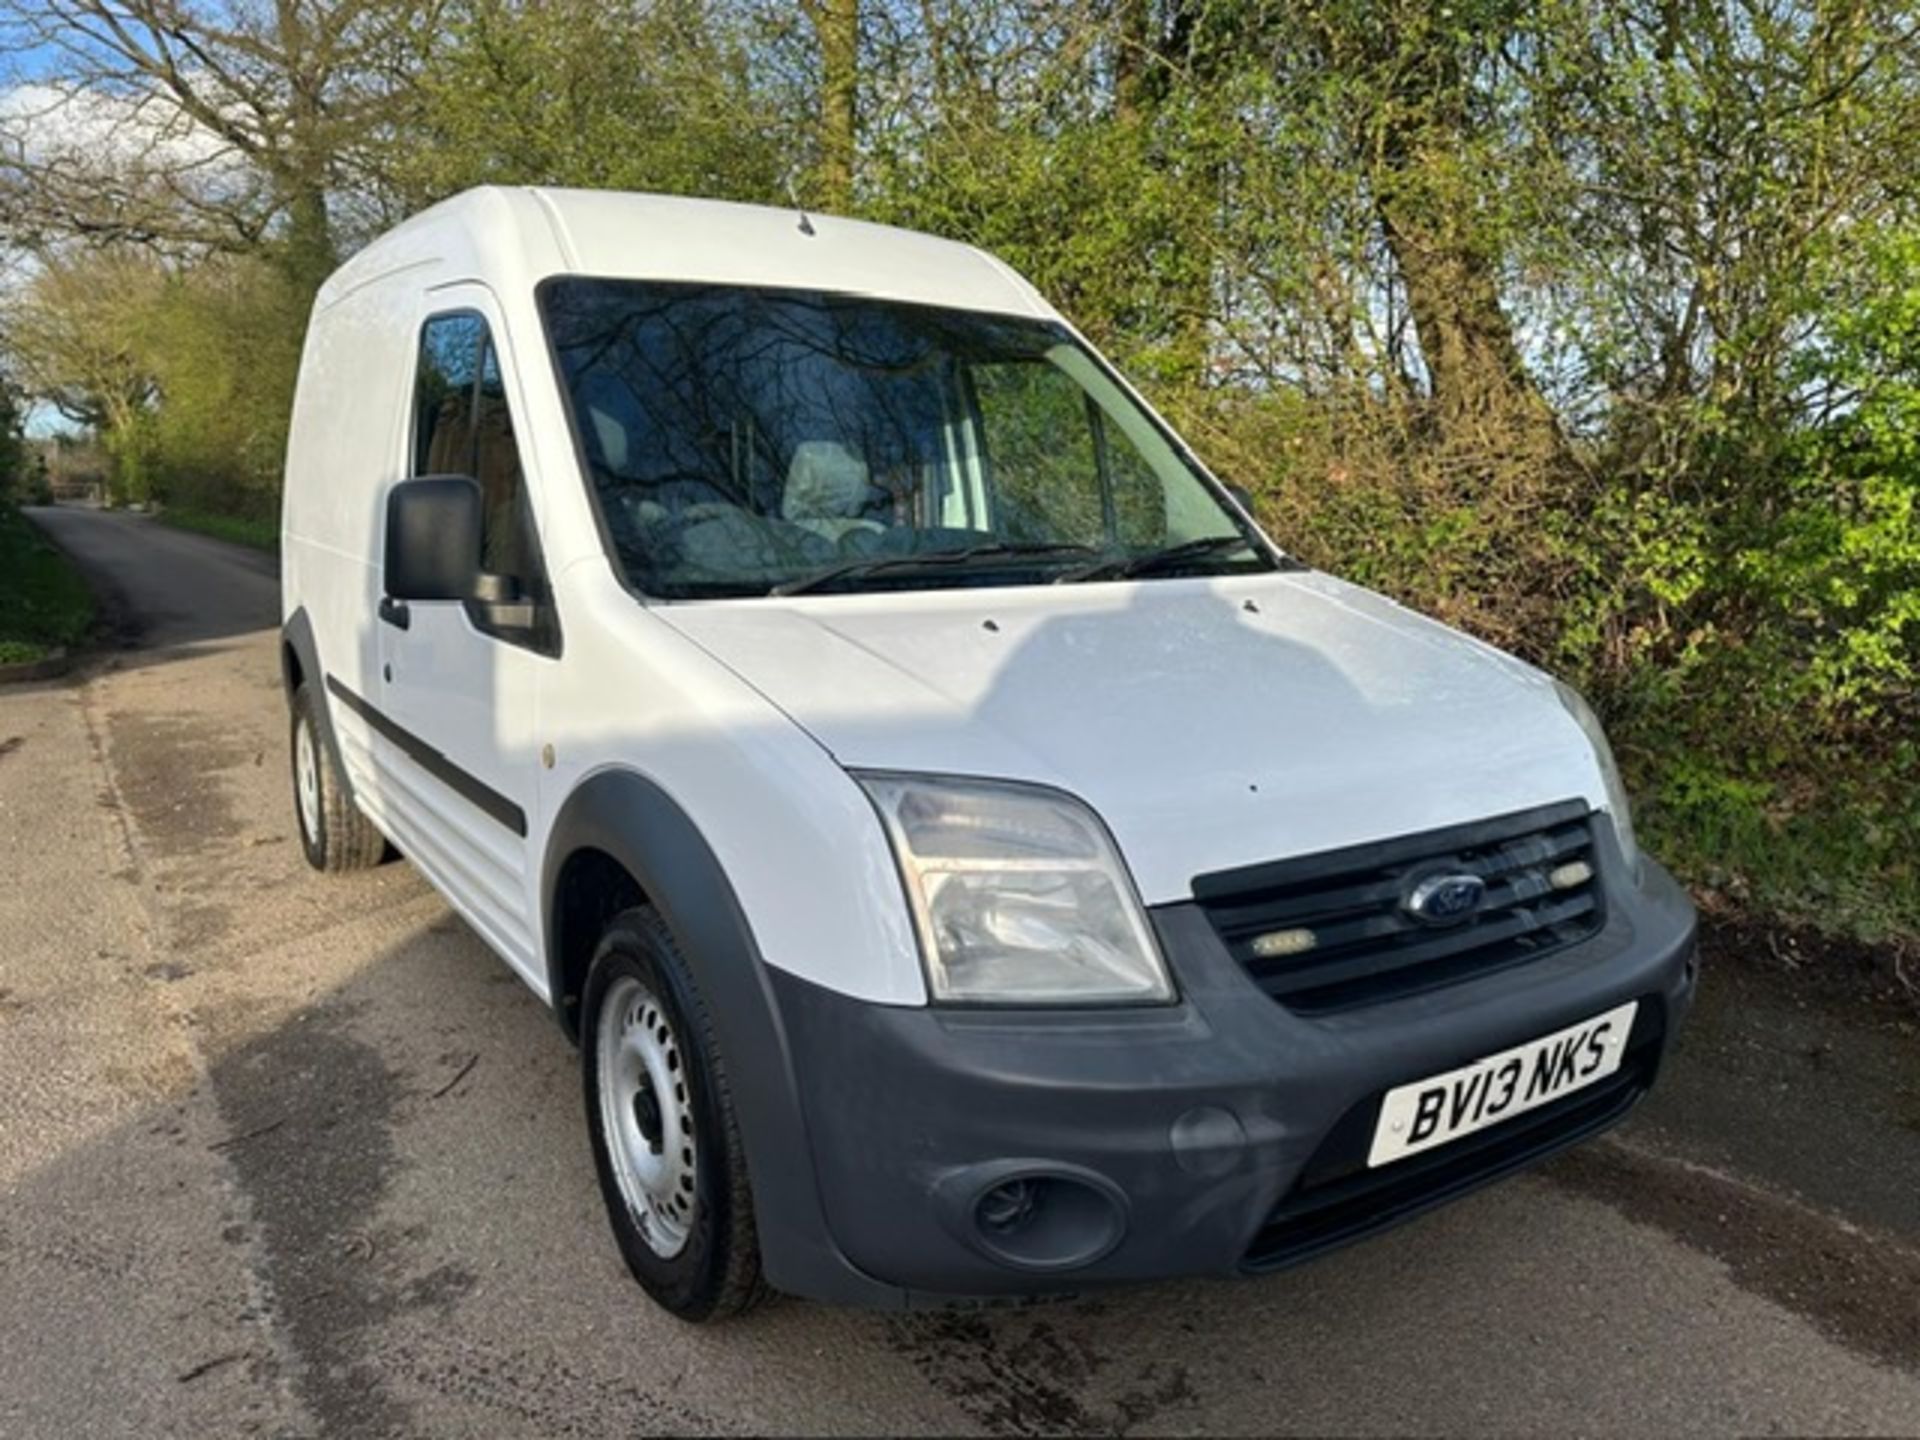 FORD TRANSIT CONNECT PANEL VAN REG:BV13 NKS 1.8LITRE. HIGH ROOF LWB. 83K REC MILES APPROX. WITH V5 A